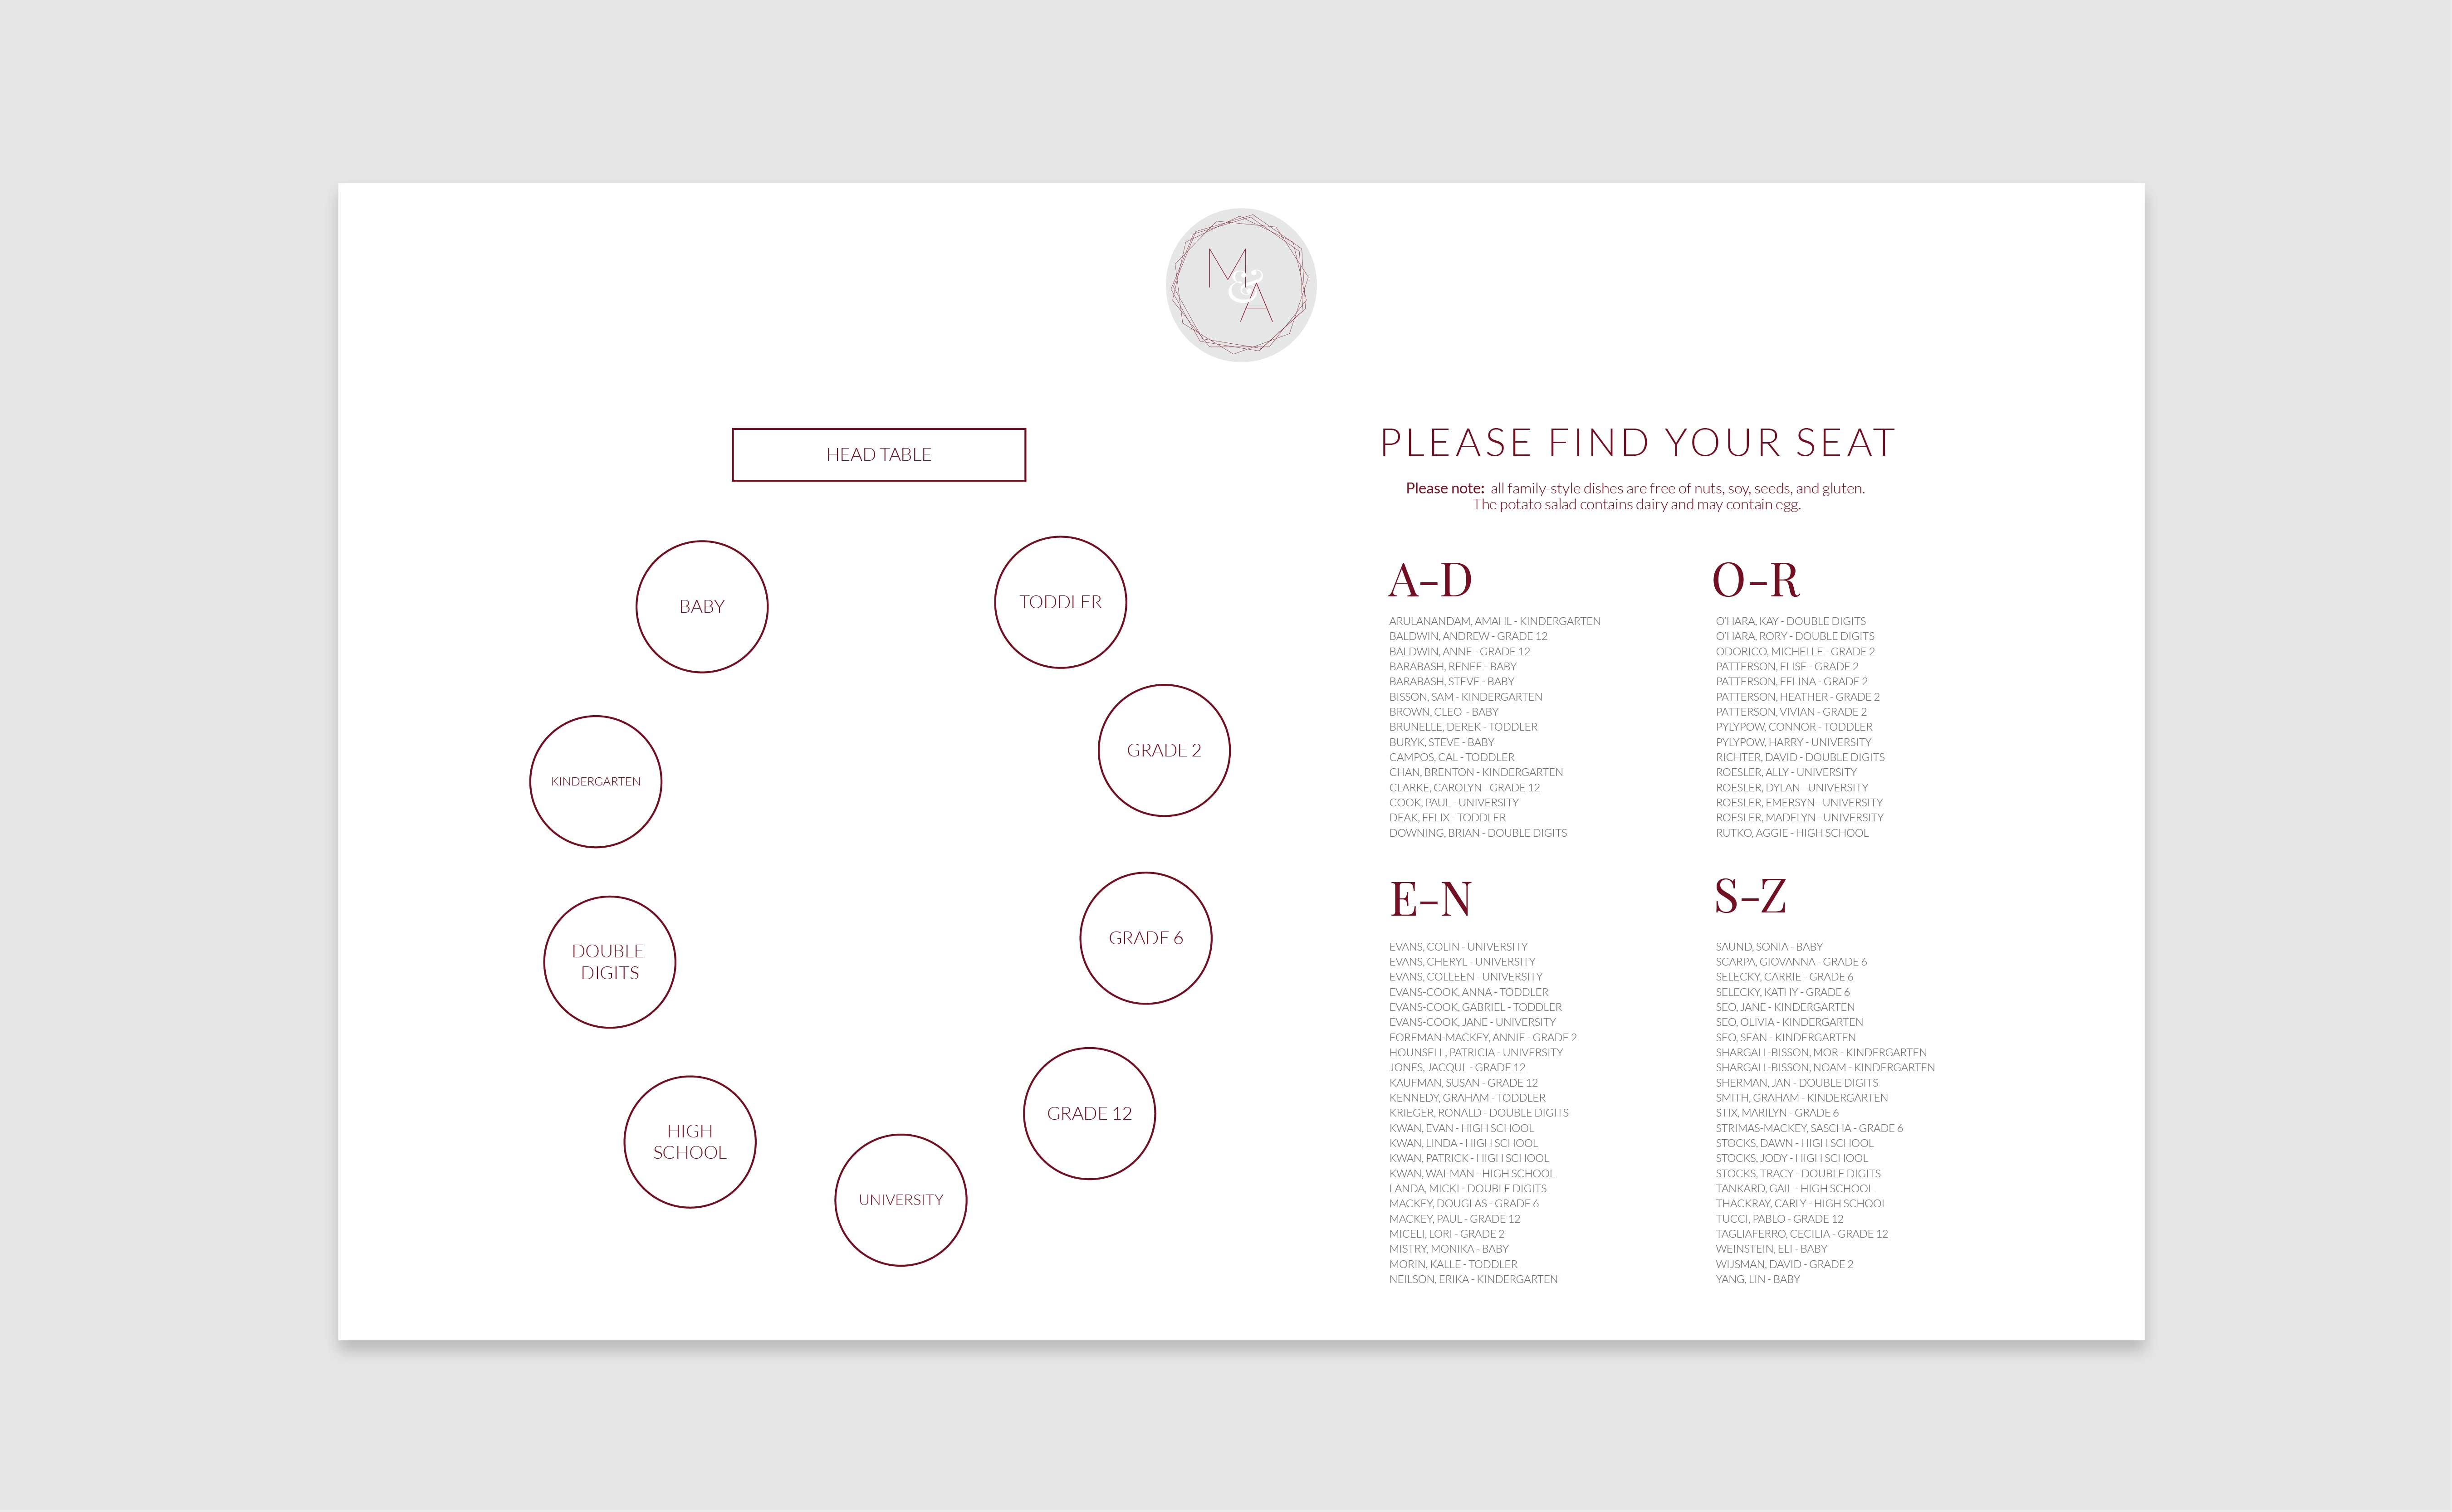 The seating chart for Molly and Andrés' wedding